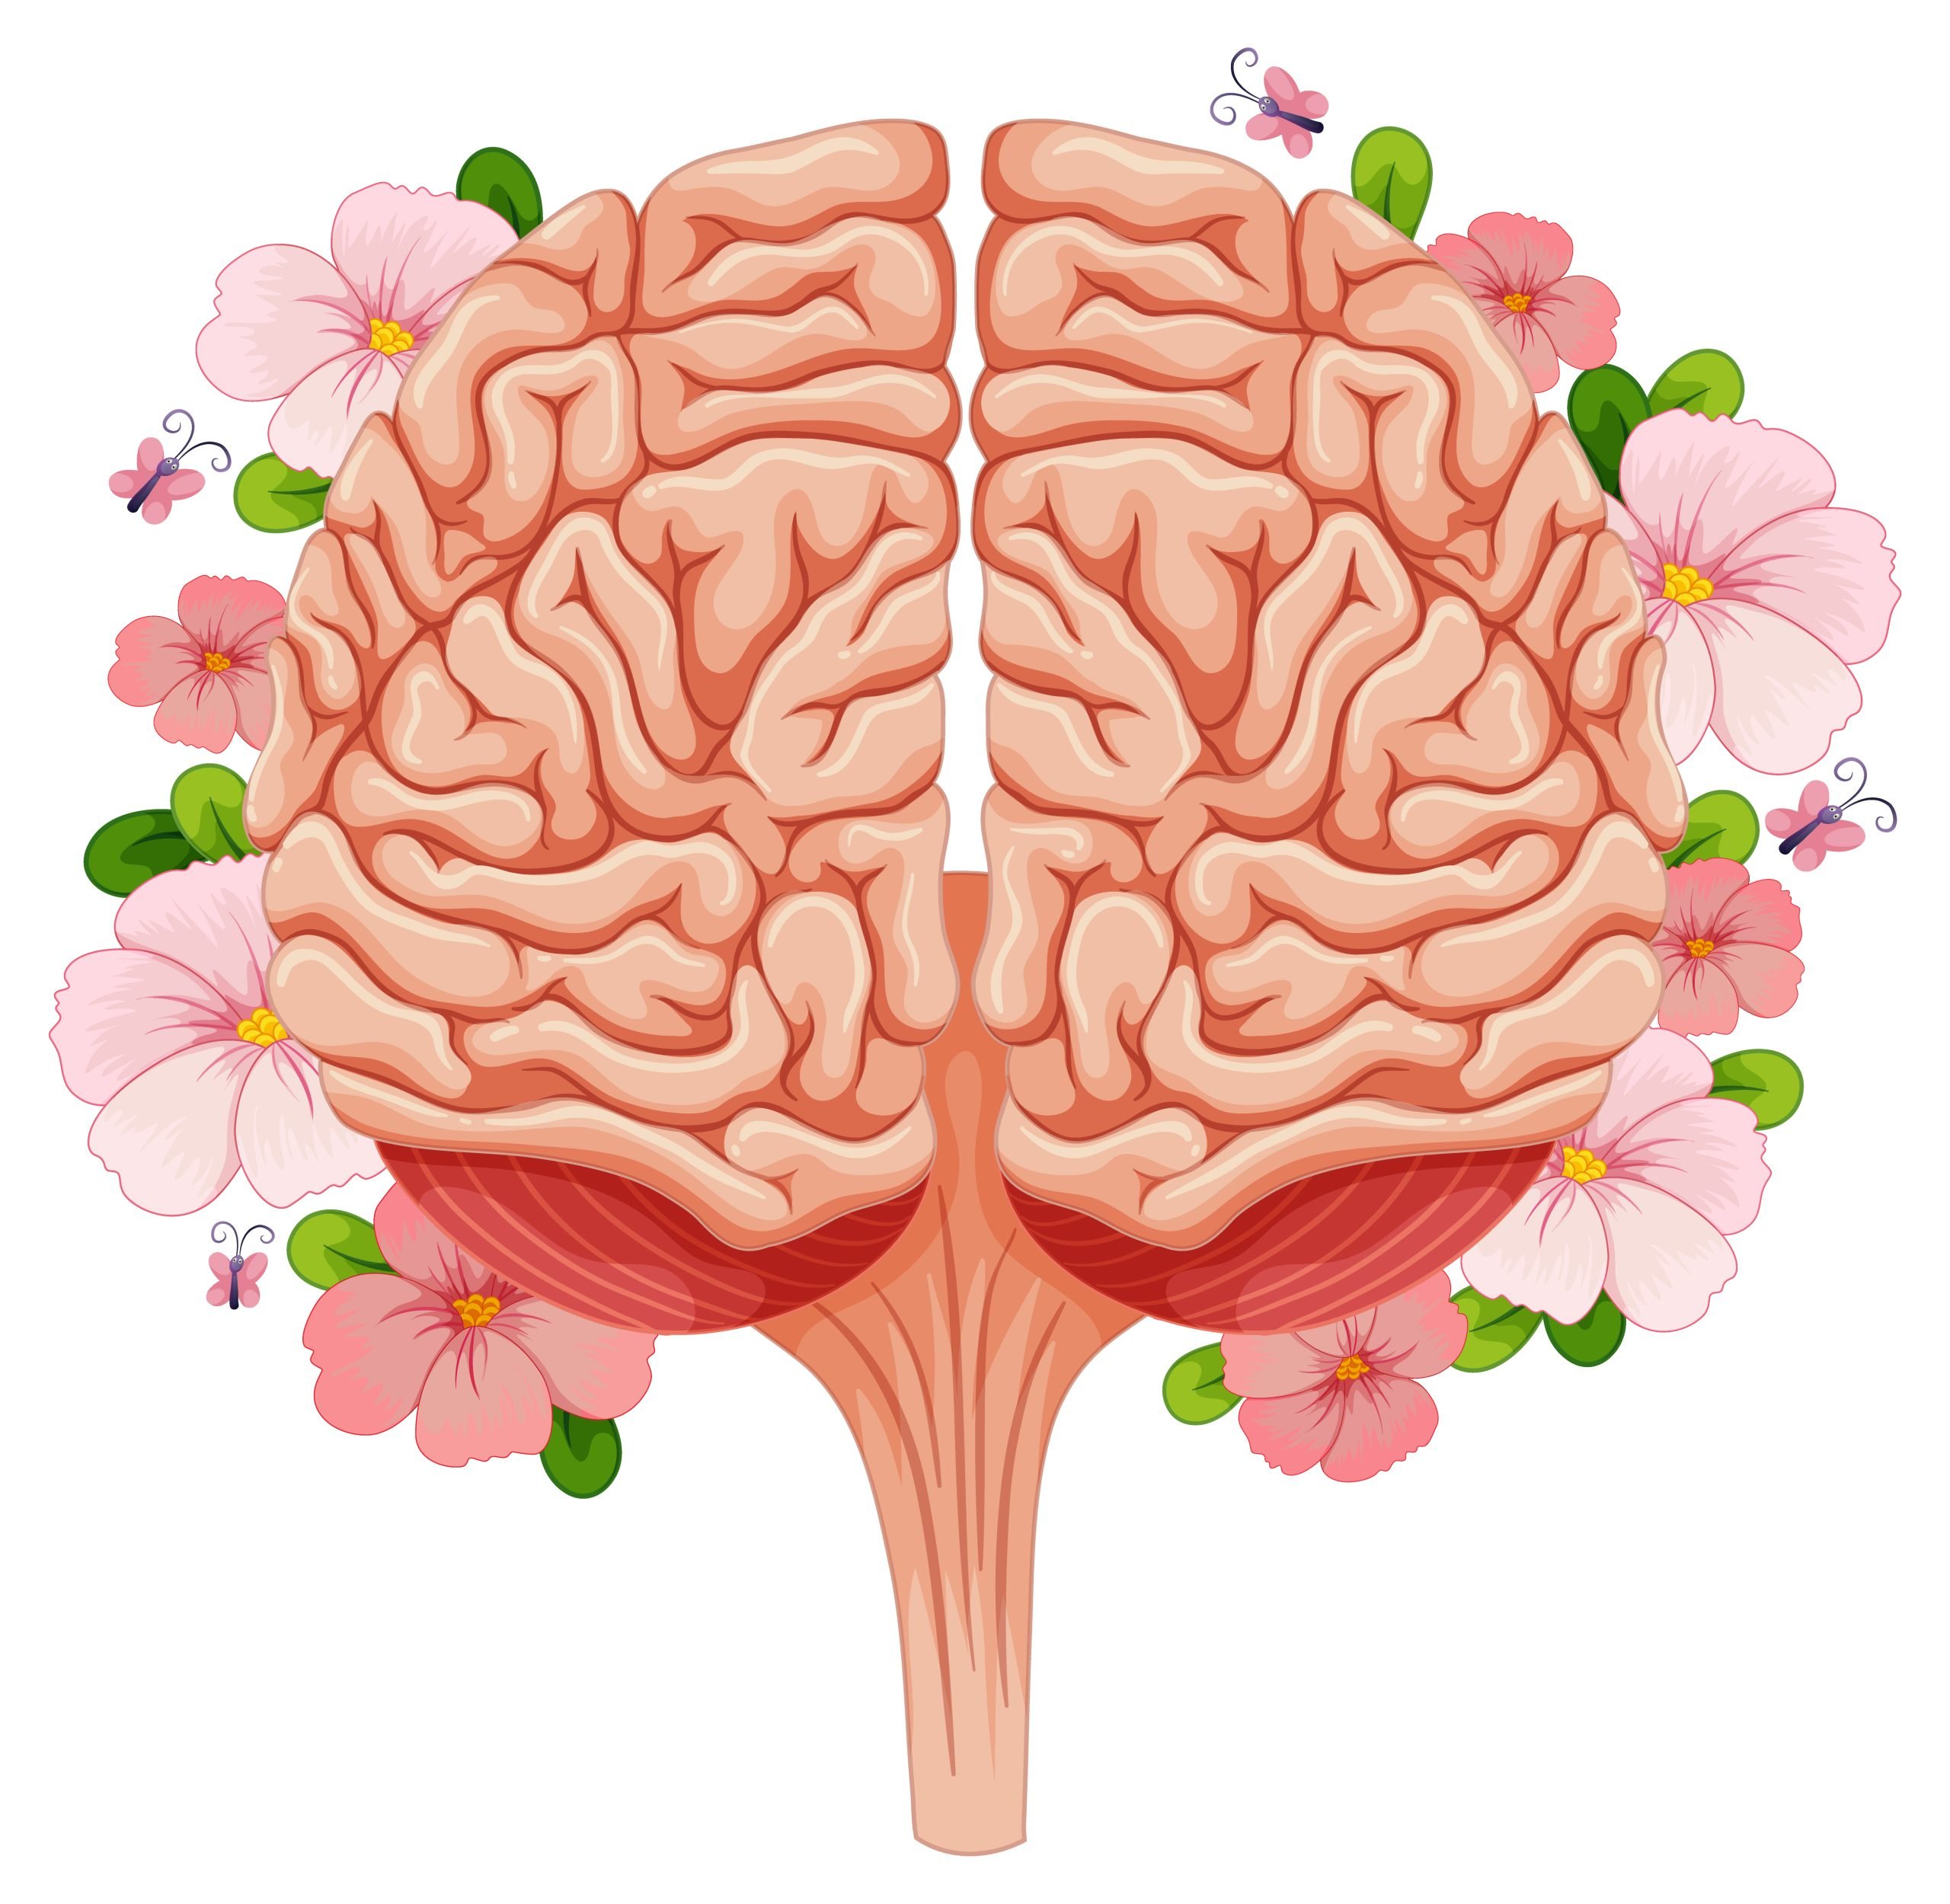 Human brain with many flowers